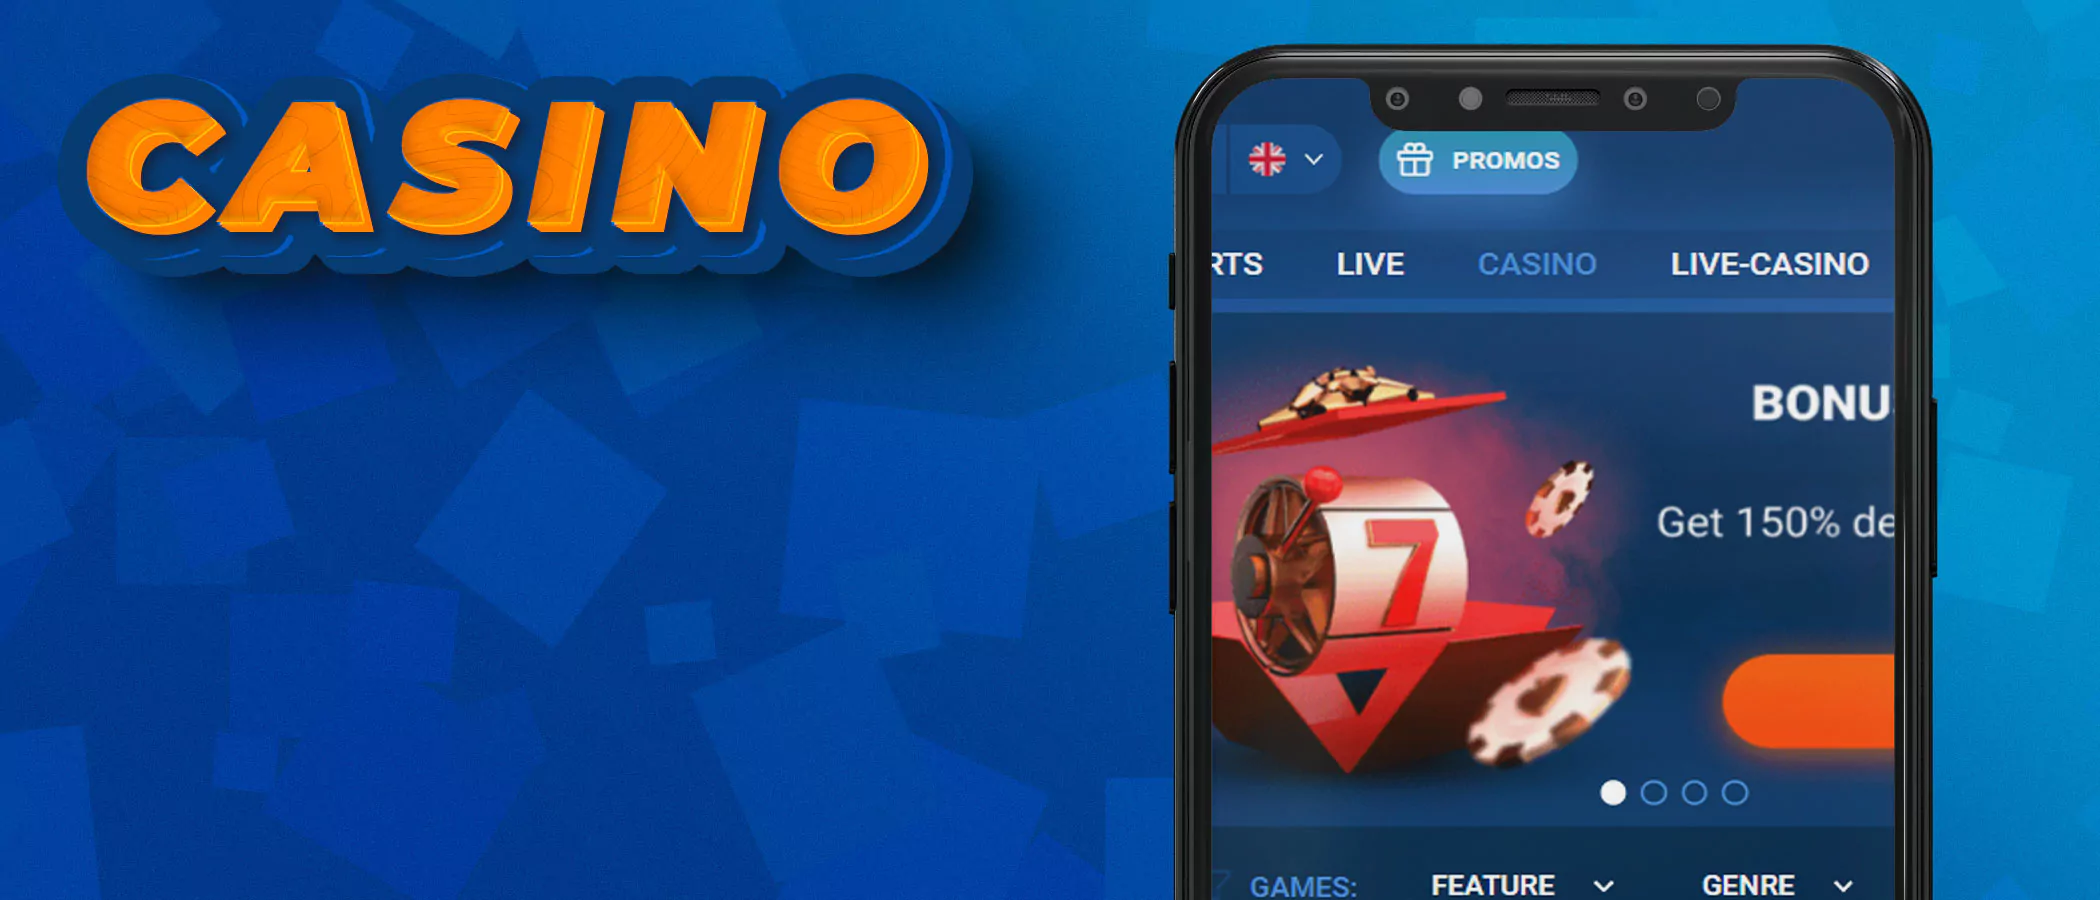 All casino games available on the mostbet casino platform.